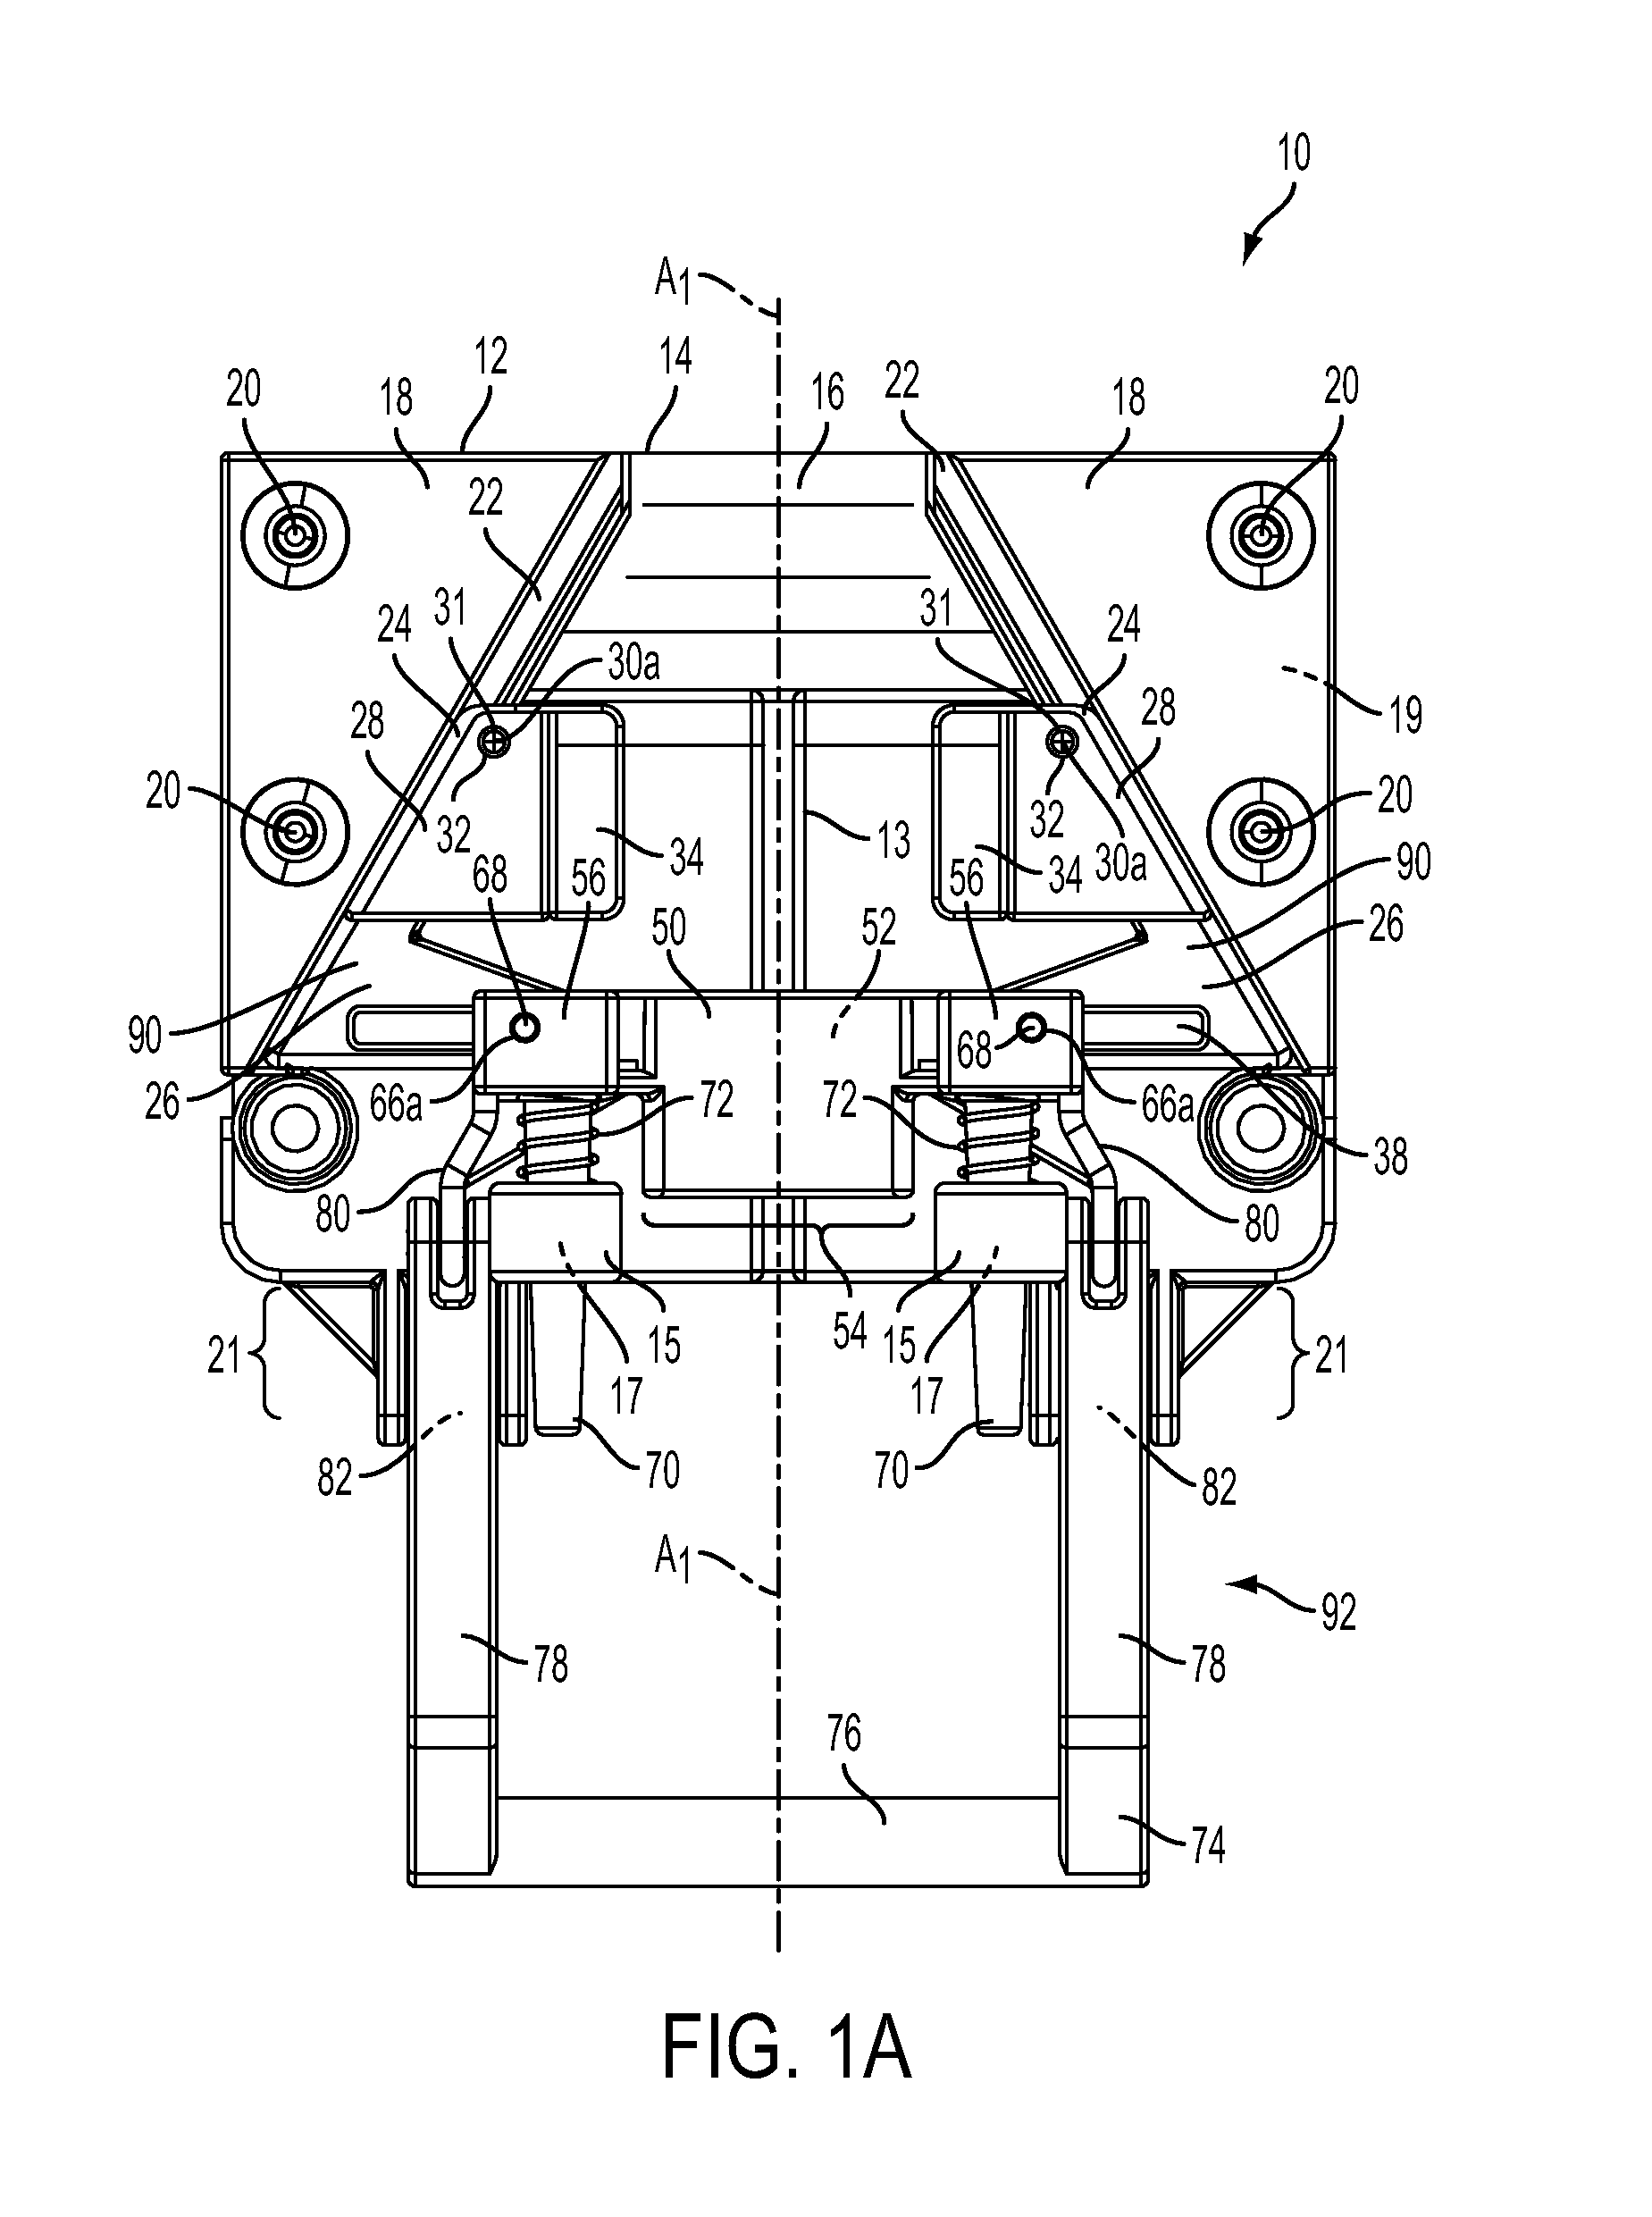 System, Method, and Apparatus for Clamping